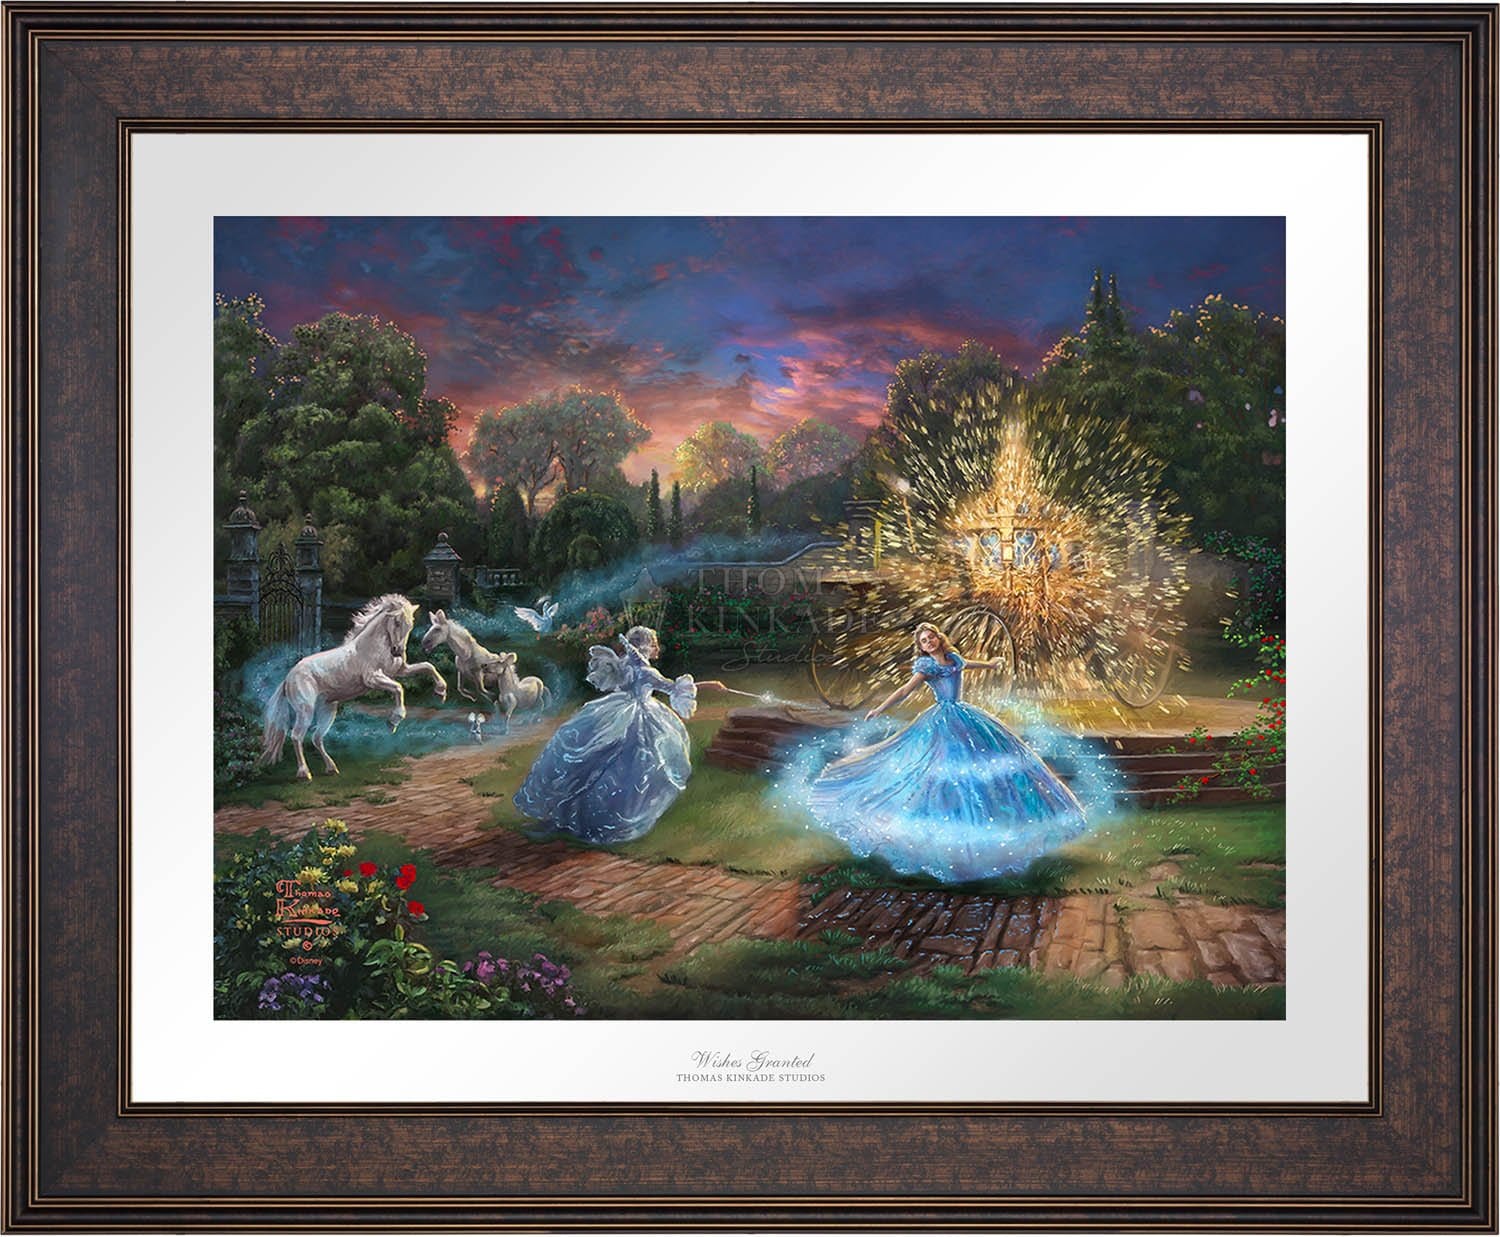 Wishes Granted features Cinderella's enchanted transformation with the help of her Fairy Godmother- Bronze Frame